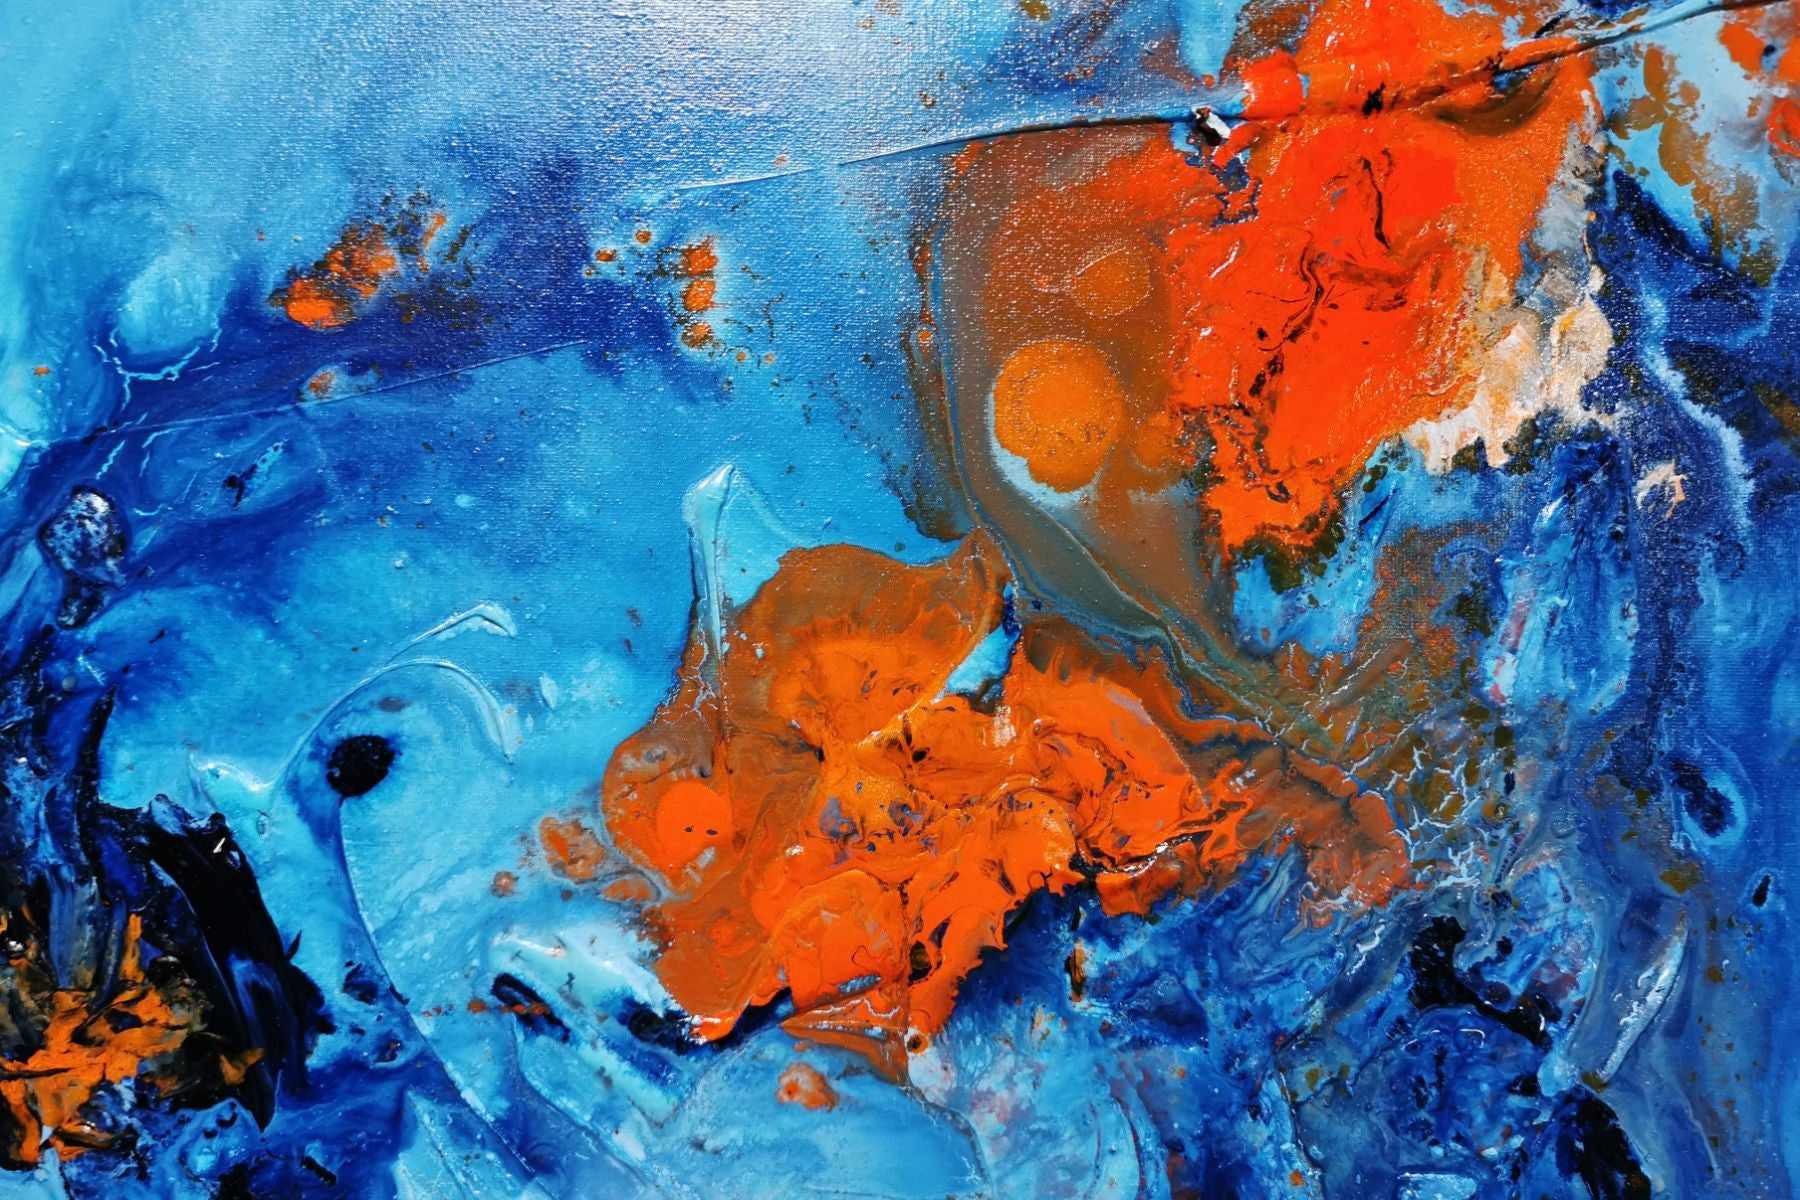 Midday Sunrise 160cm x 100cm Blue Orange Textured Abstract Painting (SOLD)